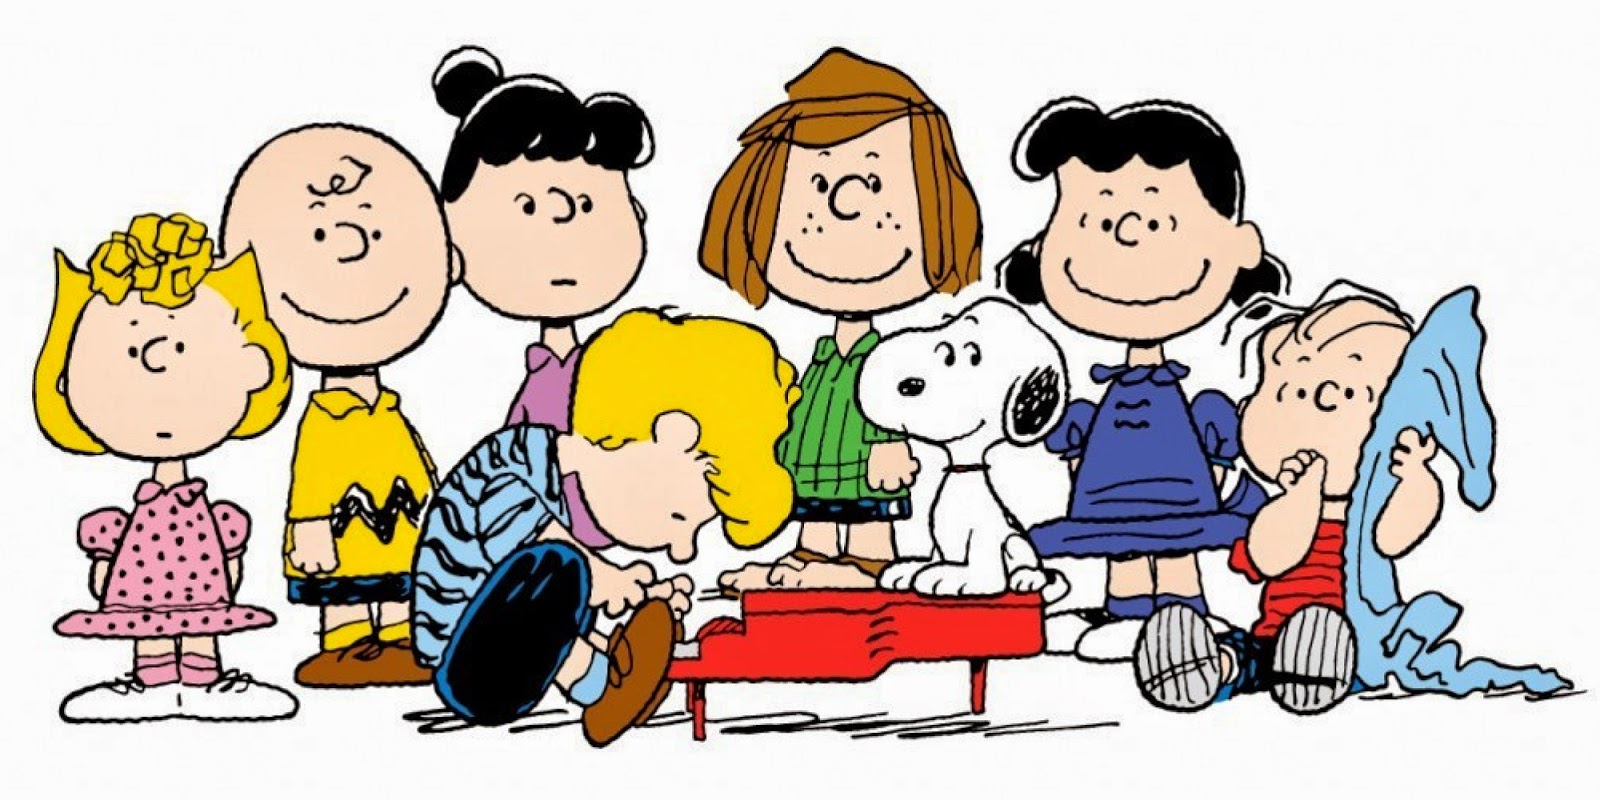 The Holiday Site Christmas Charlie Brown And peanuts Clip Art